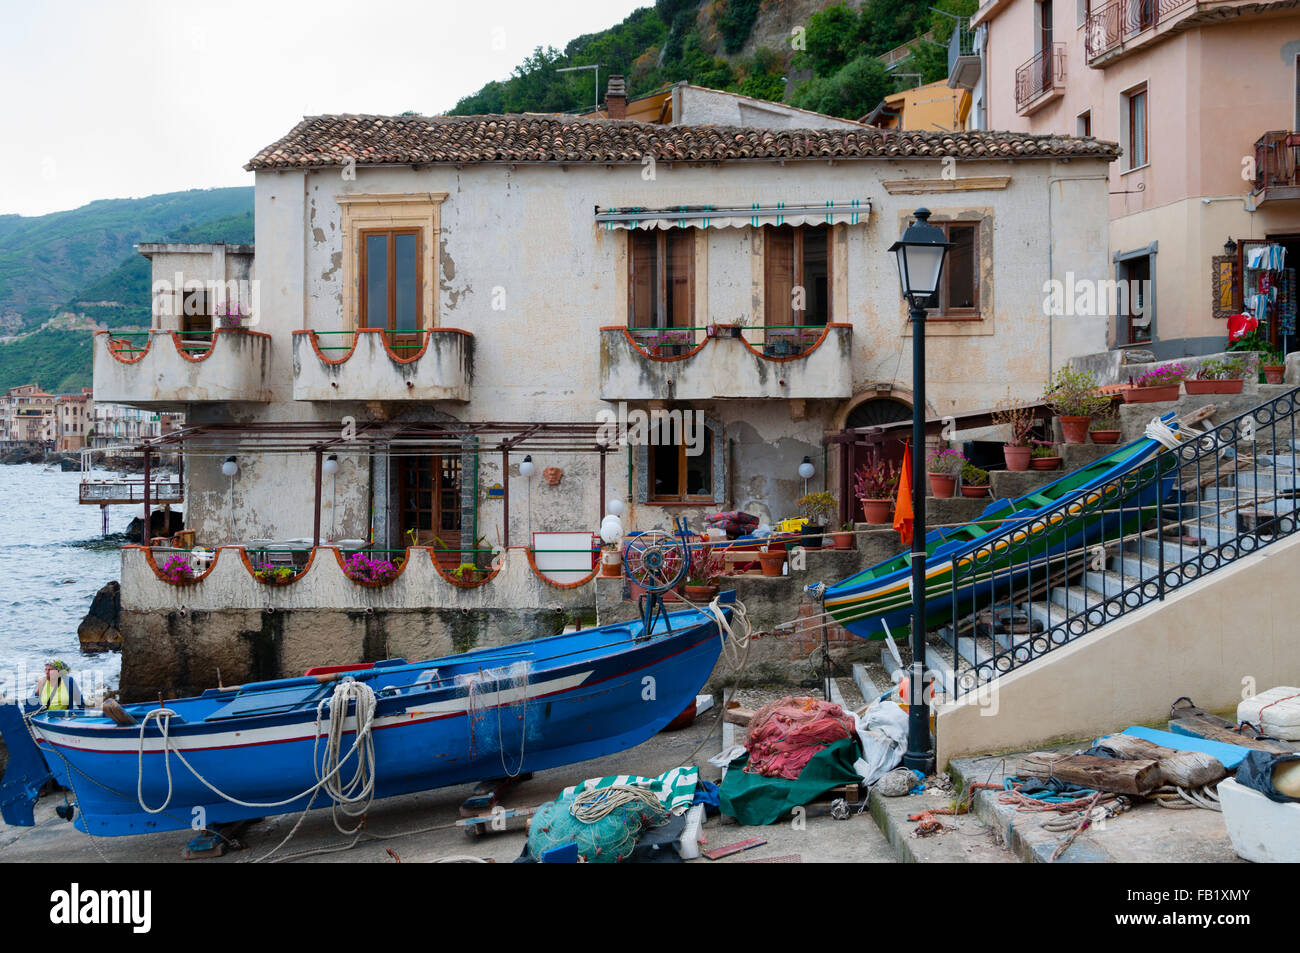 Two blue and green boats sitting on land in small italian town Scilla Stock Photo